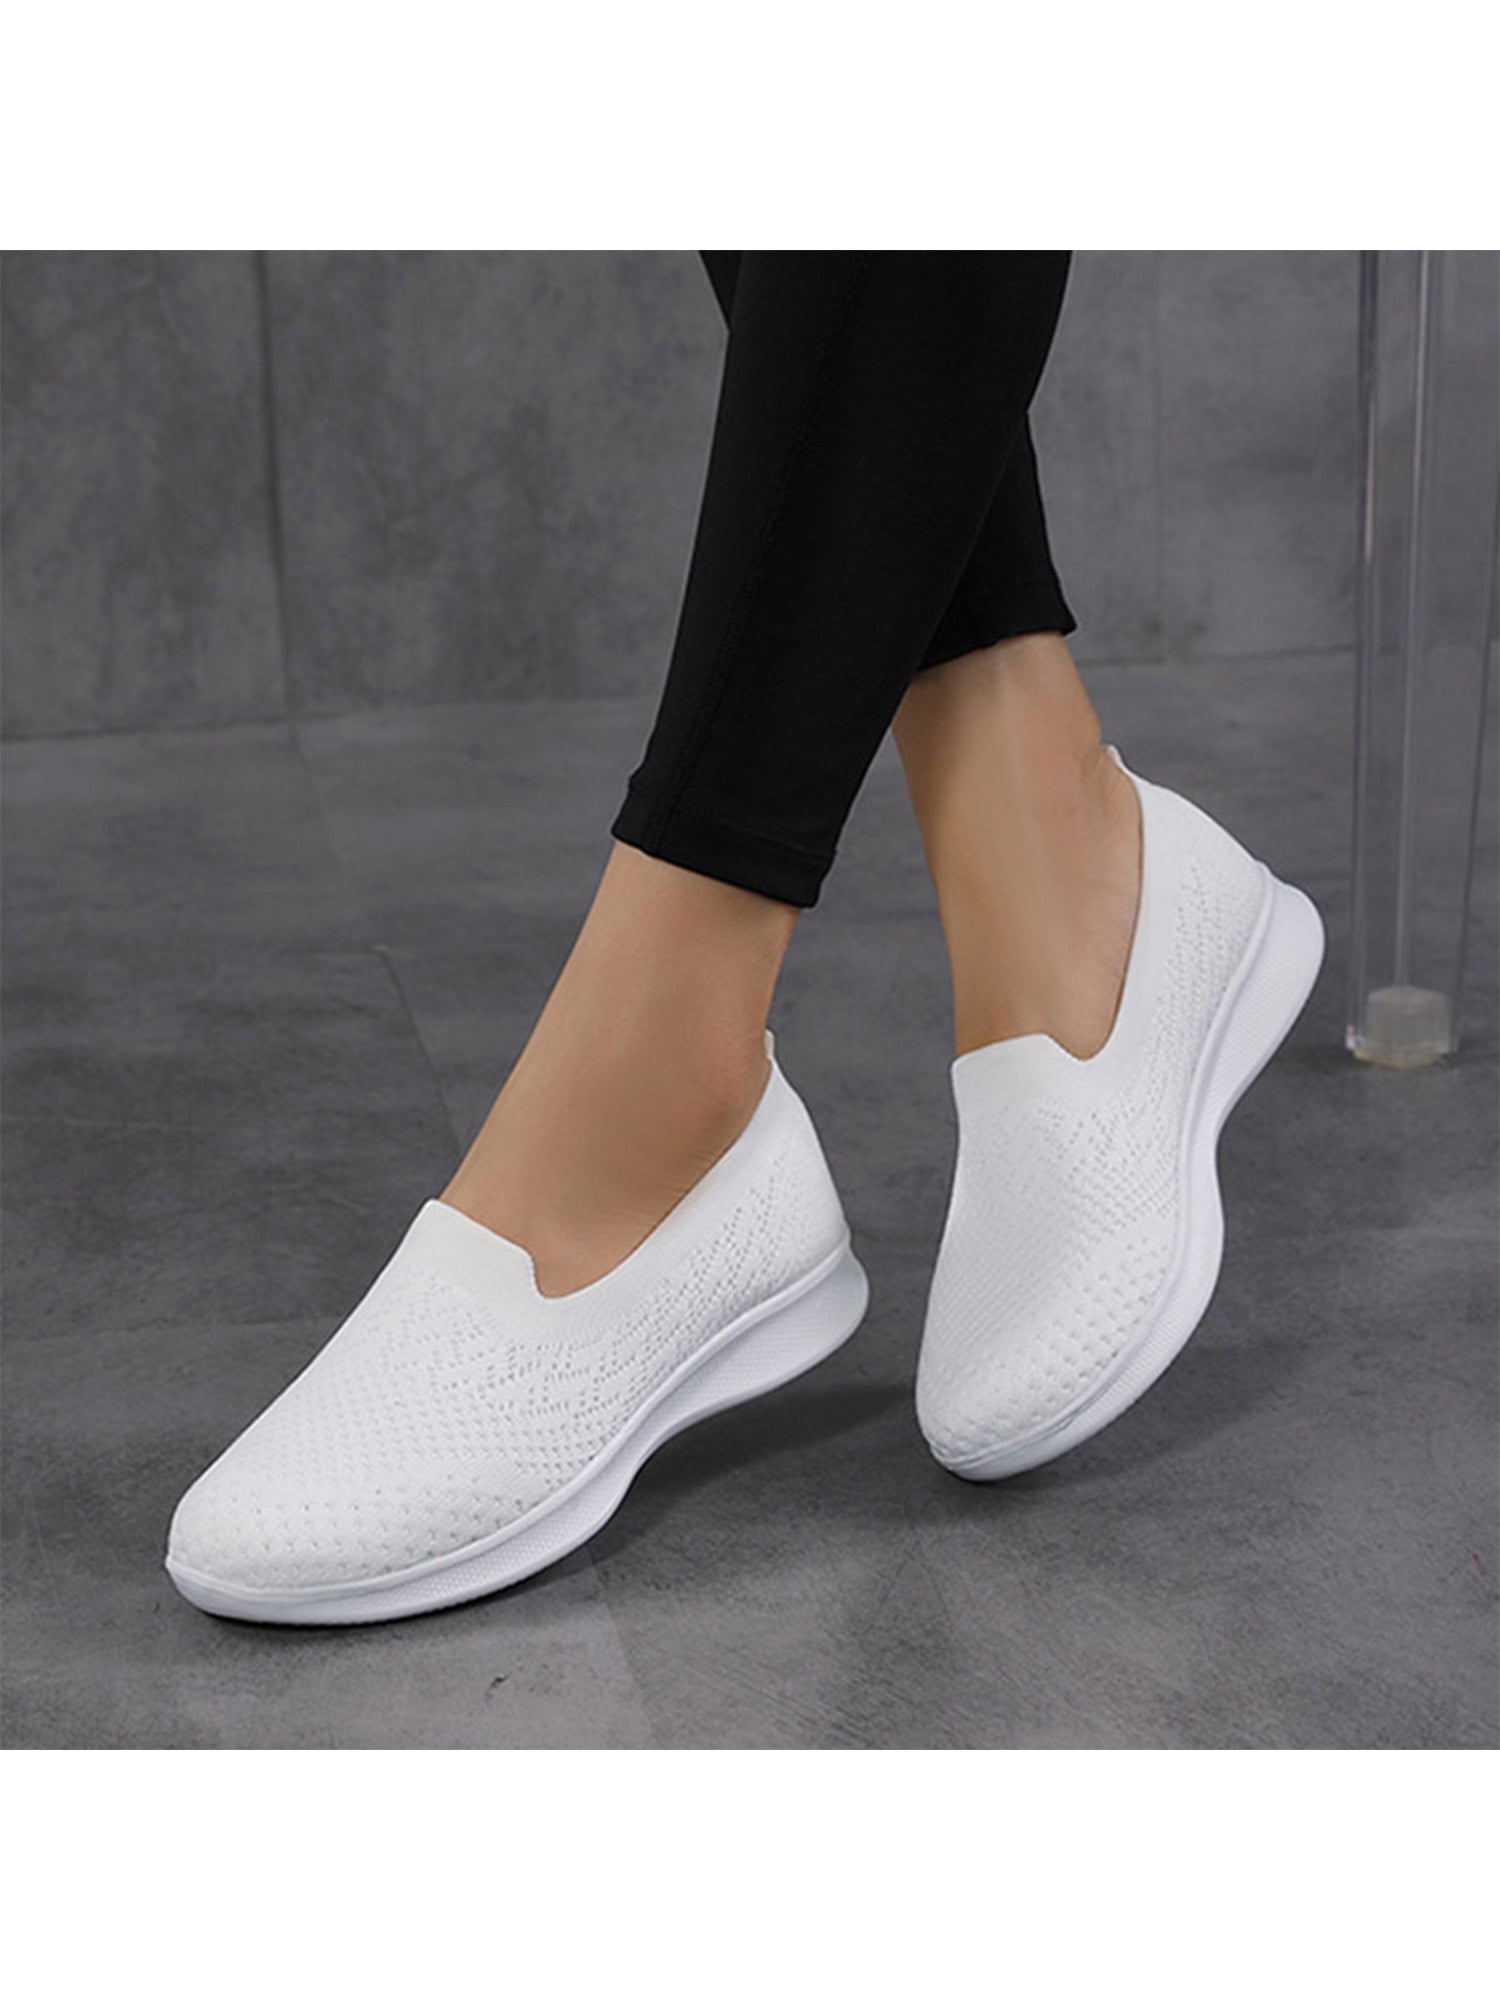 2021 Comfy Canvas Loafers Fashion Shoes Casual Summer Travel Daily Slip On Sneaker Shoes Loafers for Women Comfort